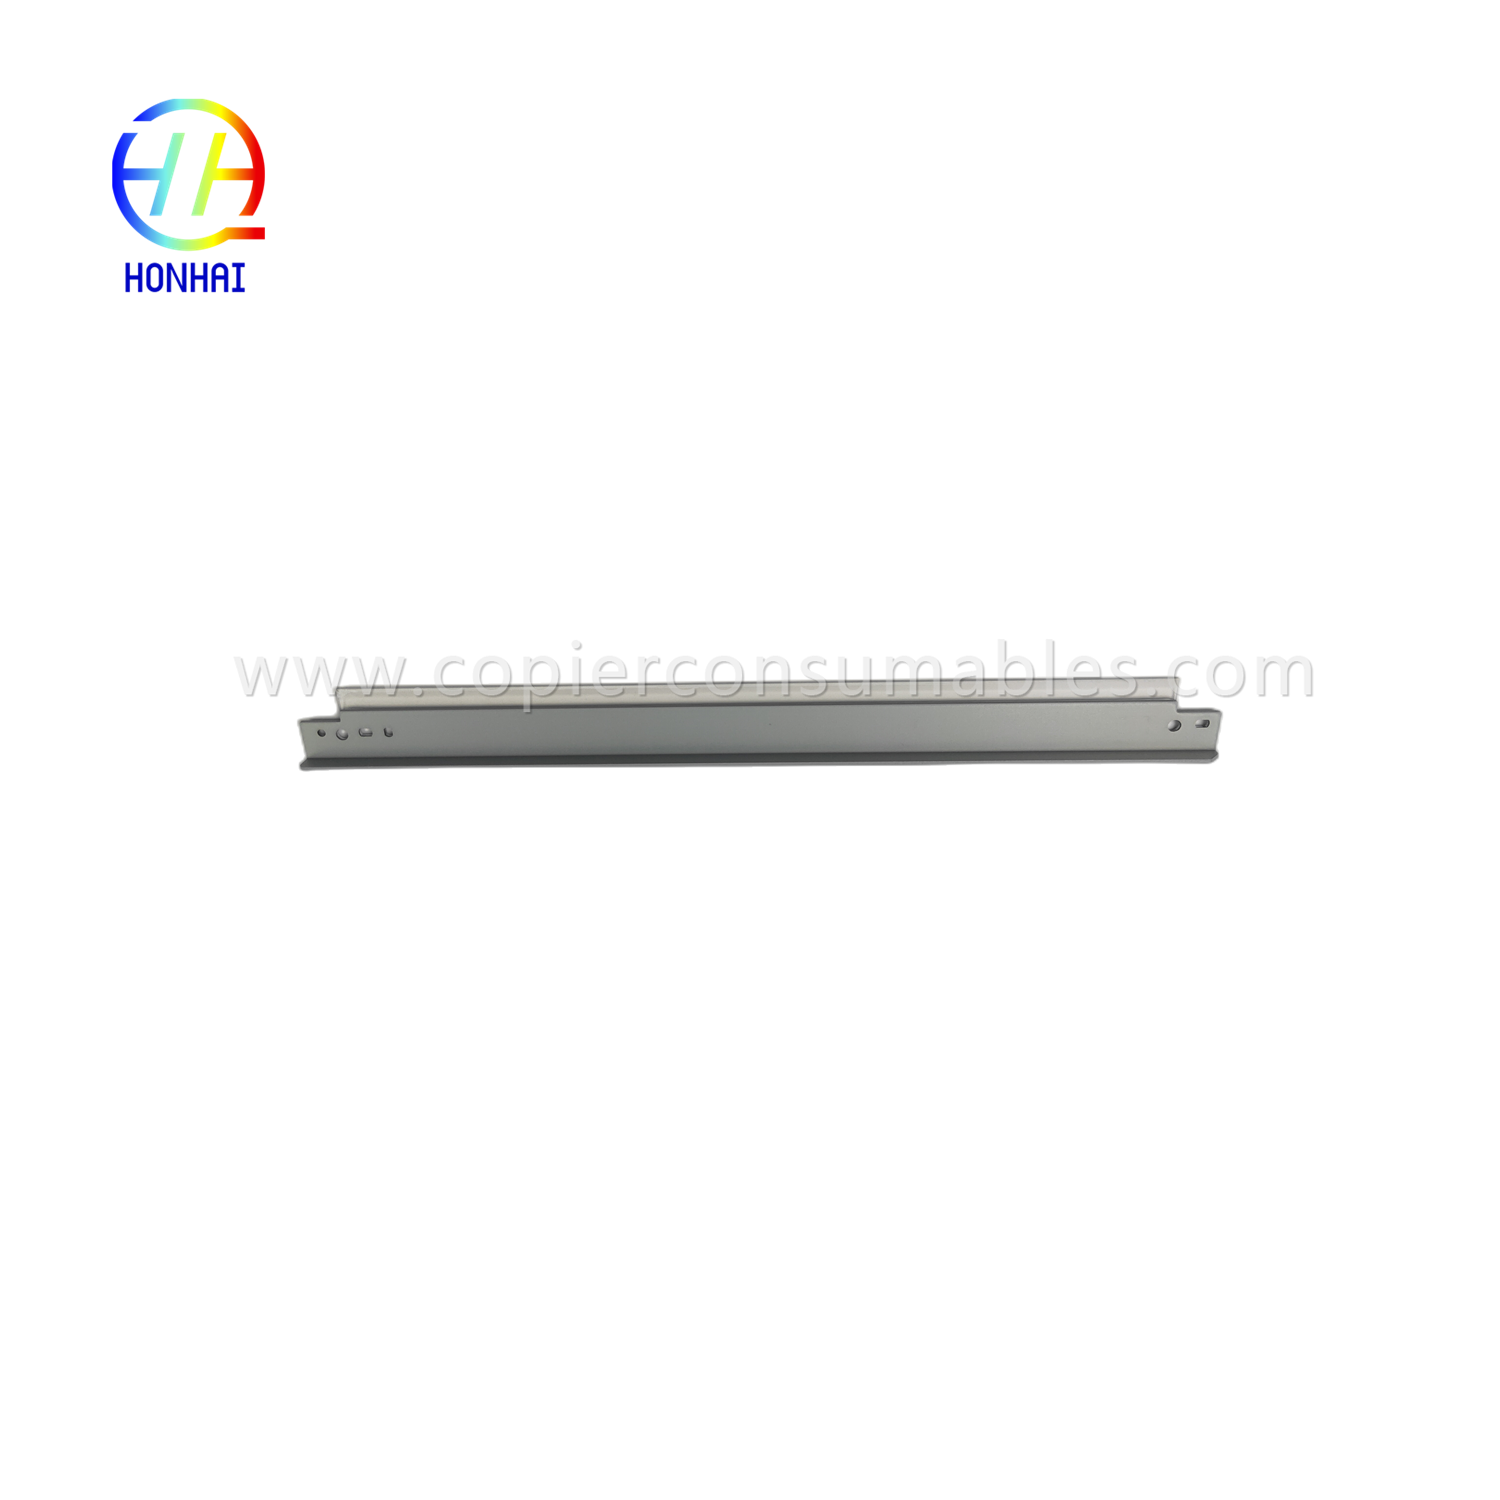 https://c585.goodao.net/drum-cleaning-blade-for-canon-ir-2520-2525-2535-2545-2530-2540-product/